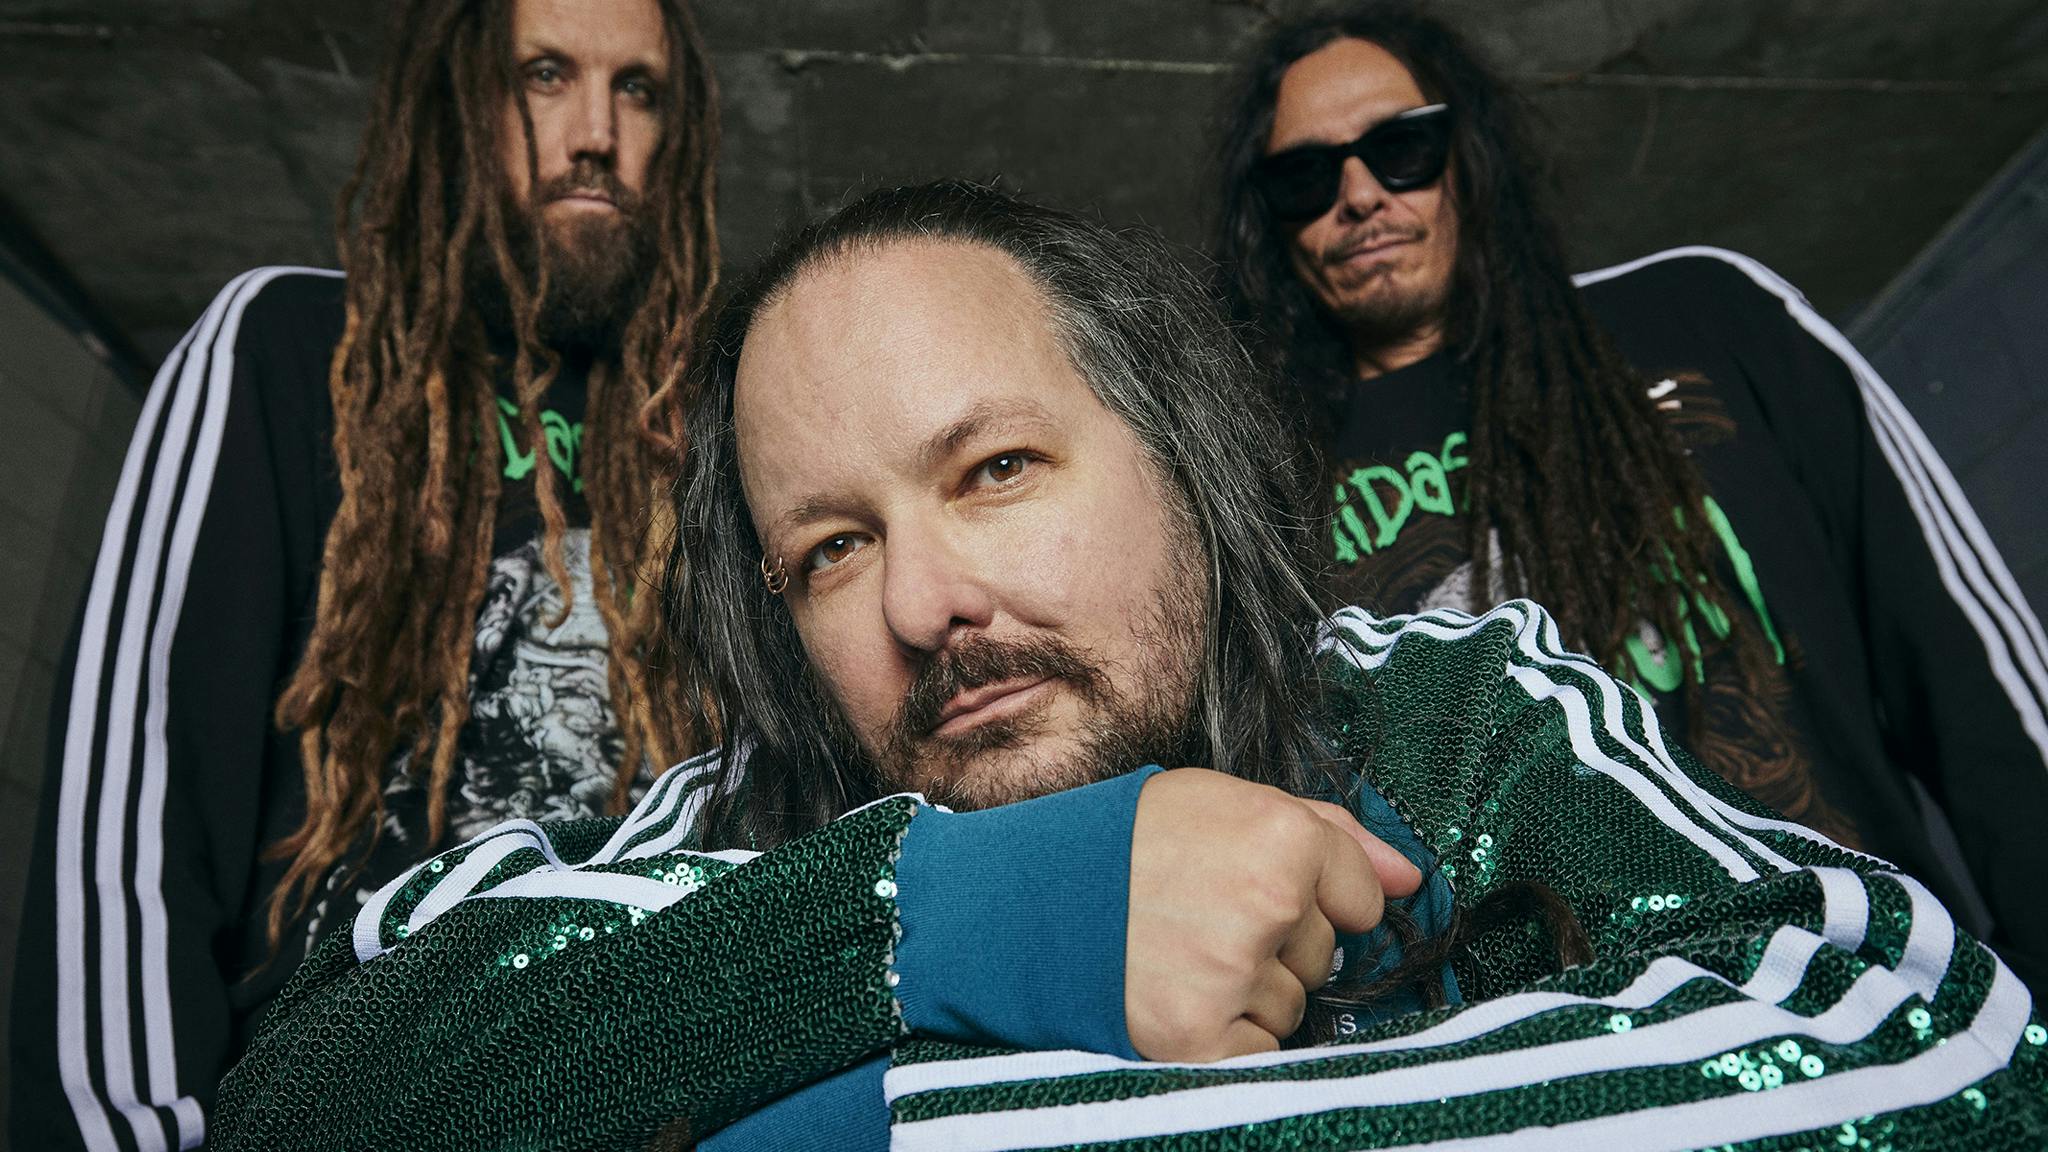 Korn reveal second adidas collab drop, including green sequin tracksuit